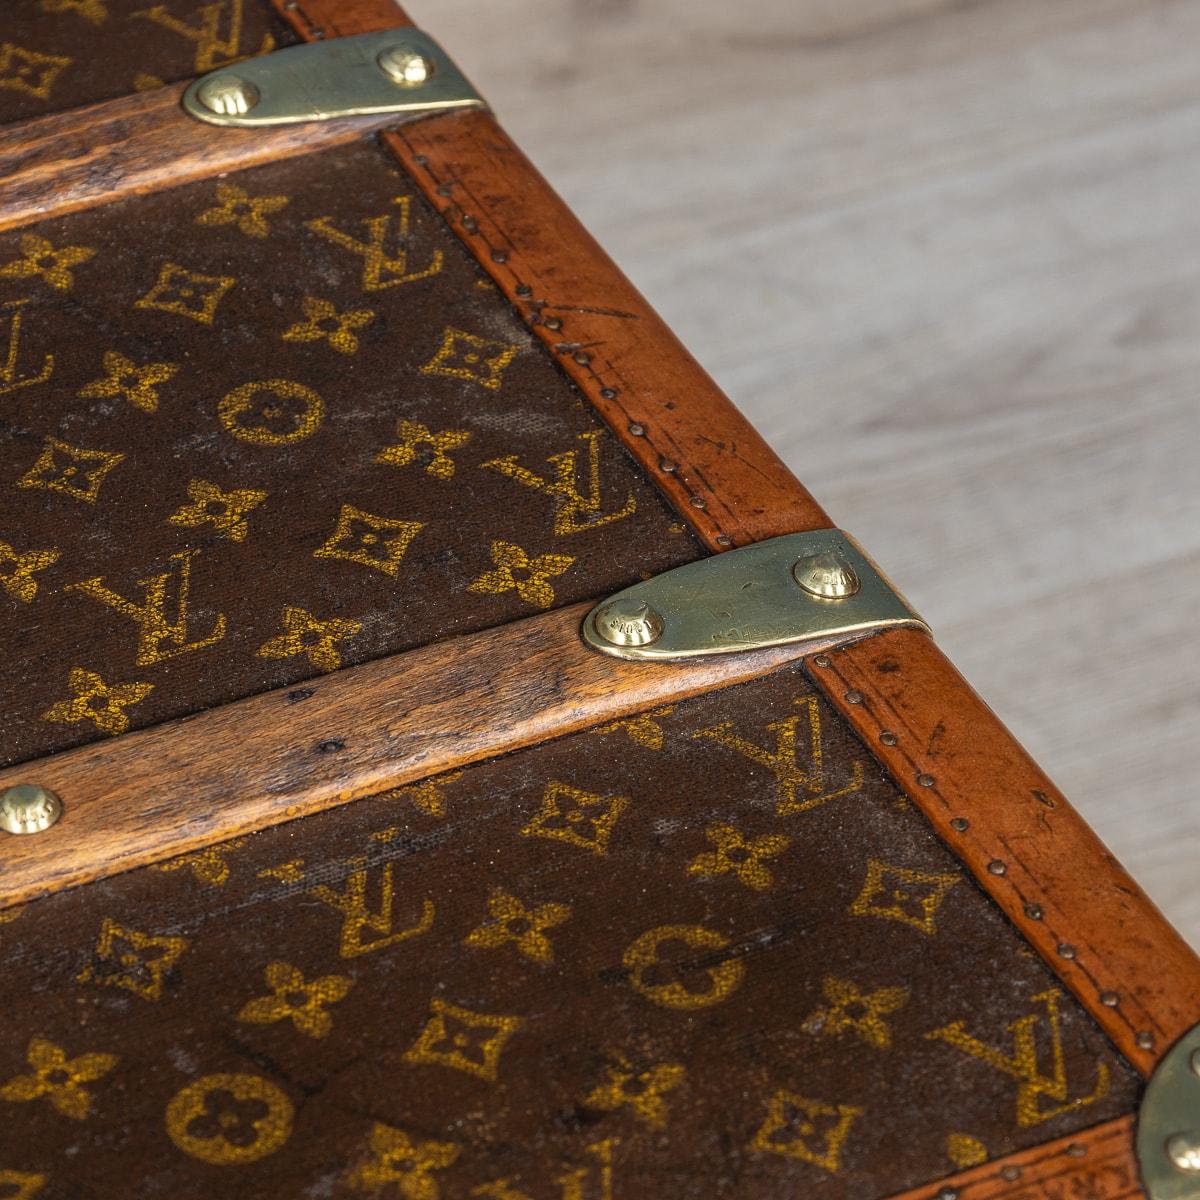 20th Century Louis Vuitton Cabin Trunk In Monogram Canvas, France c.1930 For Sale 6